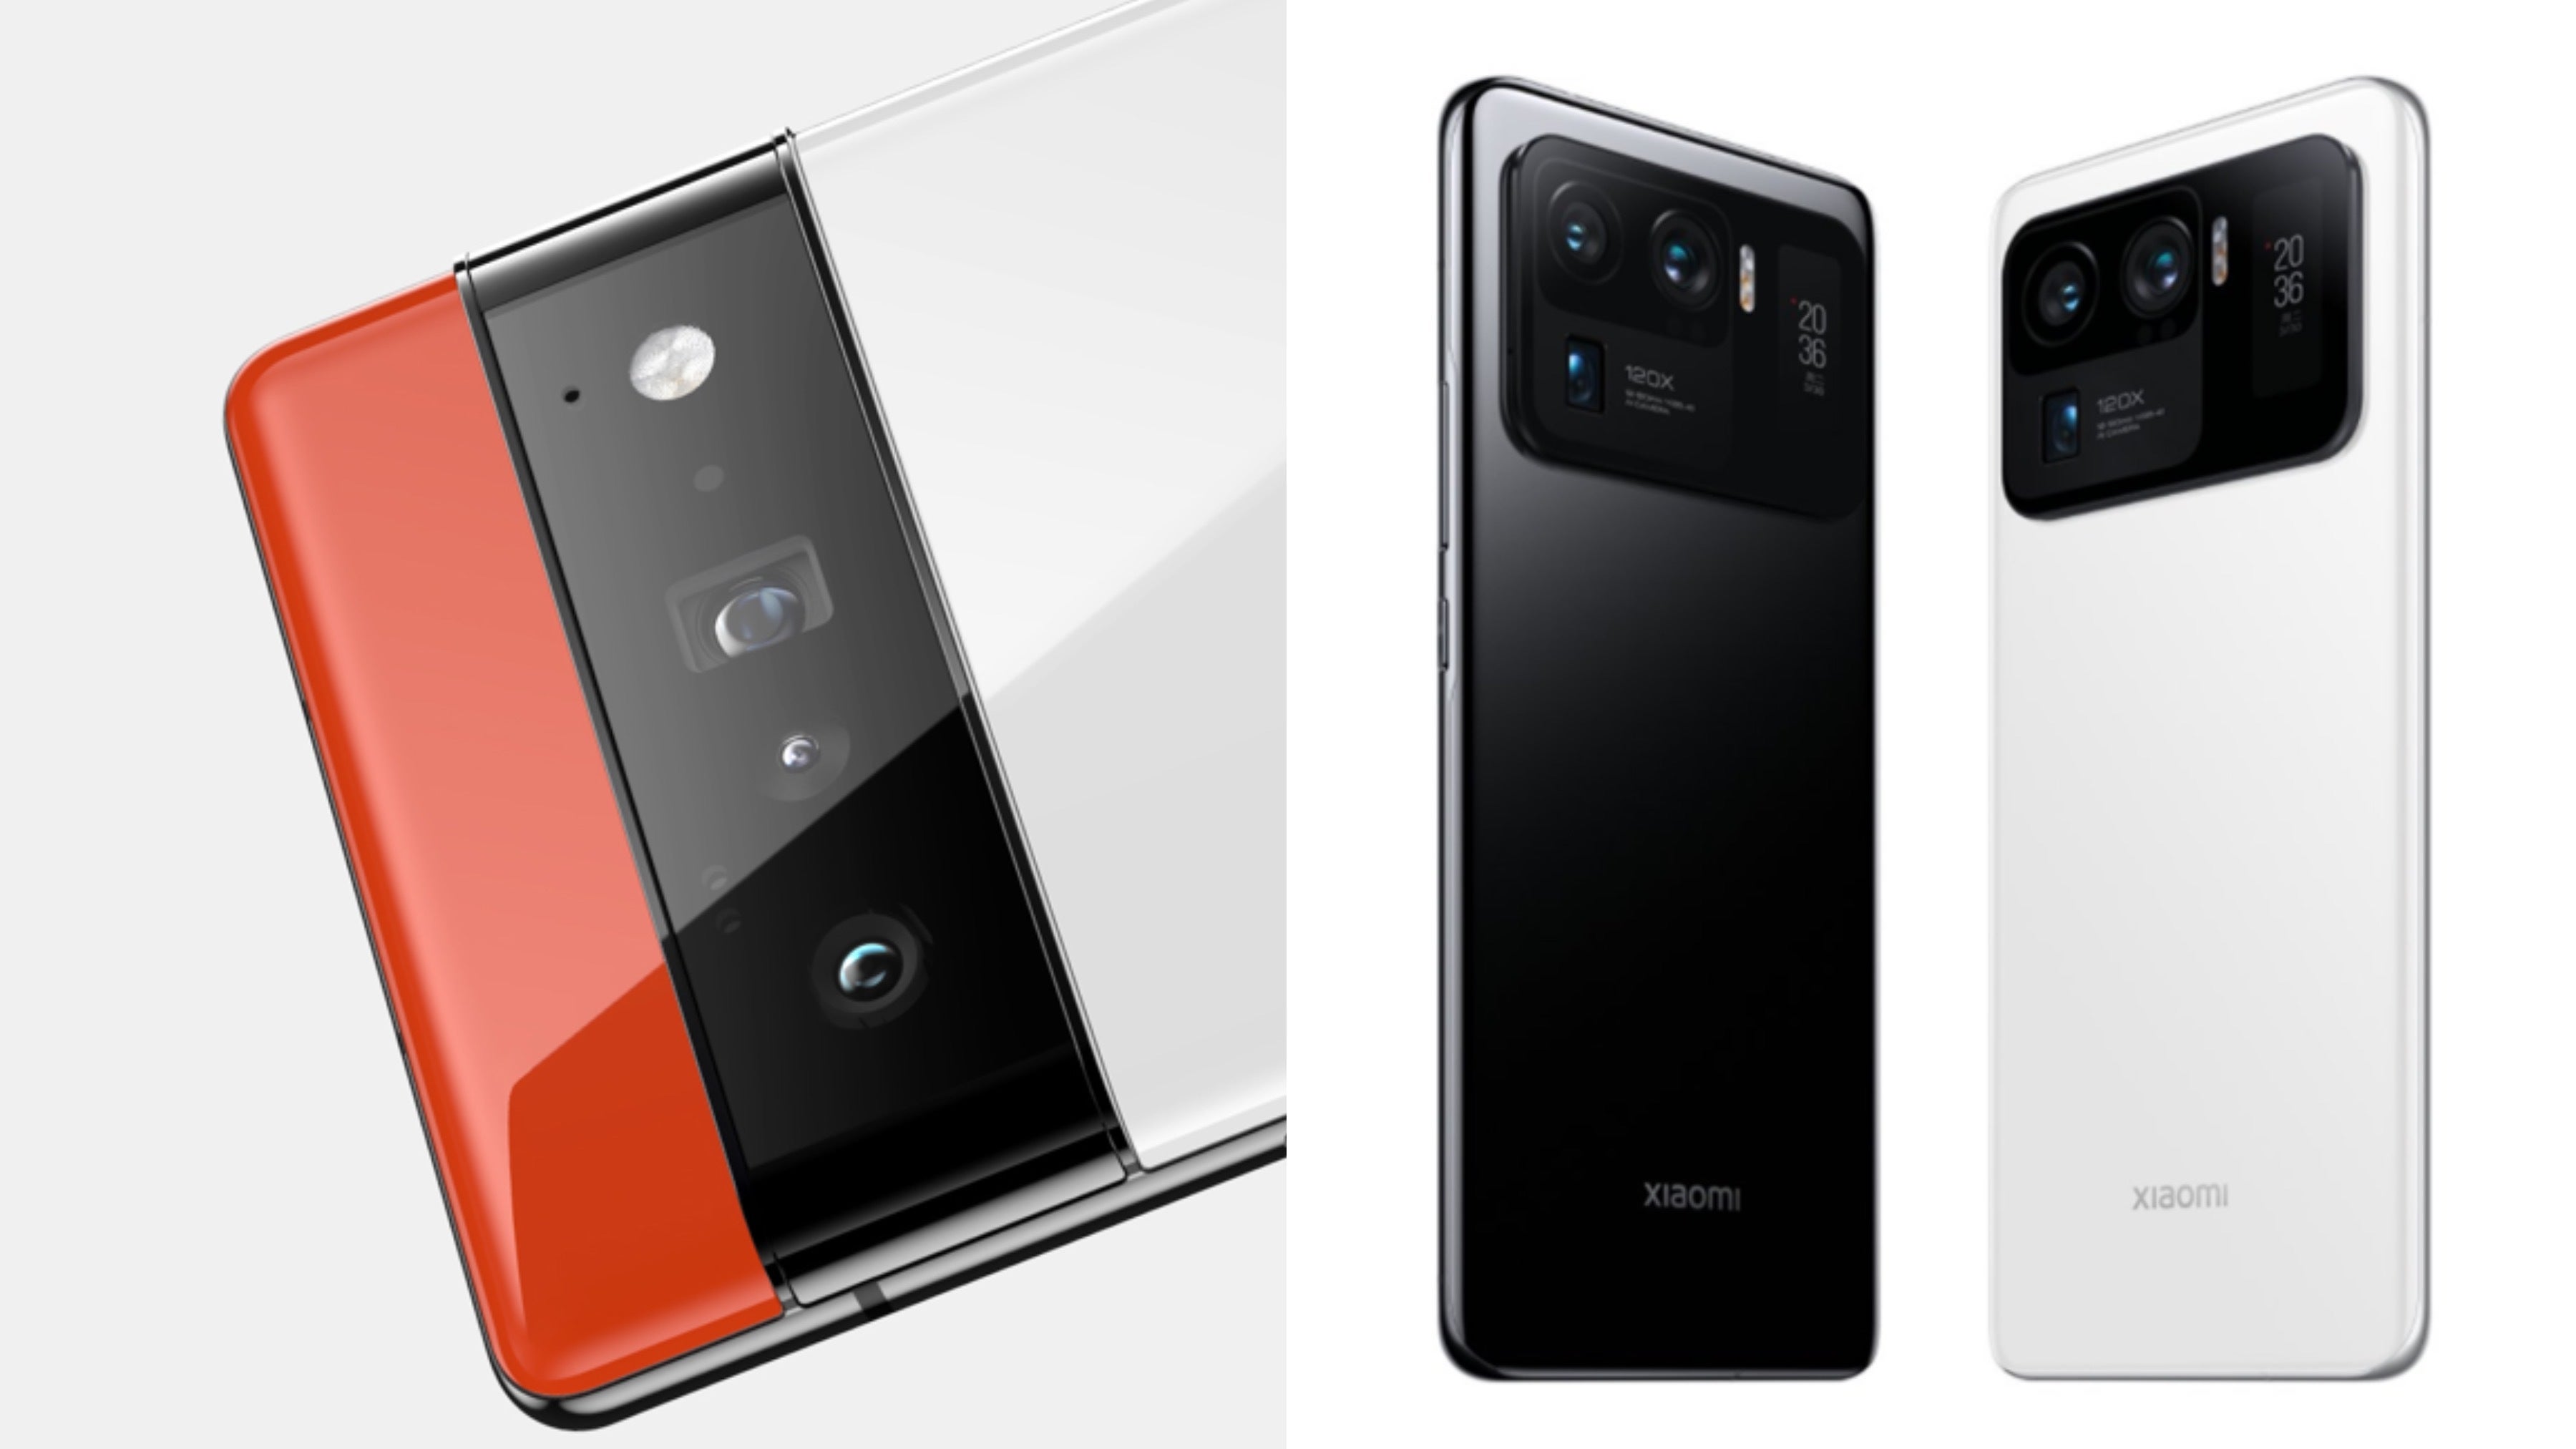 The Xiaomi Mi 11 Ultra (right) is the smartphone with the largest camera sensor, if we don't count Sharp's Aquos R6, which is only available in Japan. - Google Pixel 6 Pro and its 122MP camera system: The 4-year wait for 4 new cameras